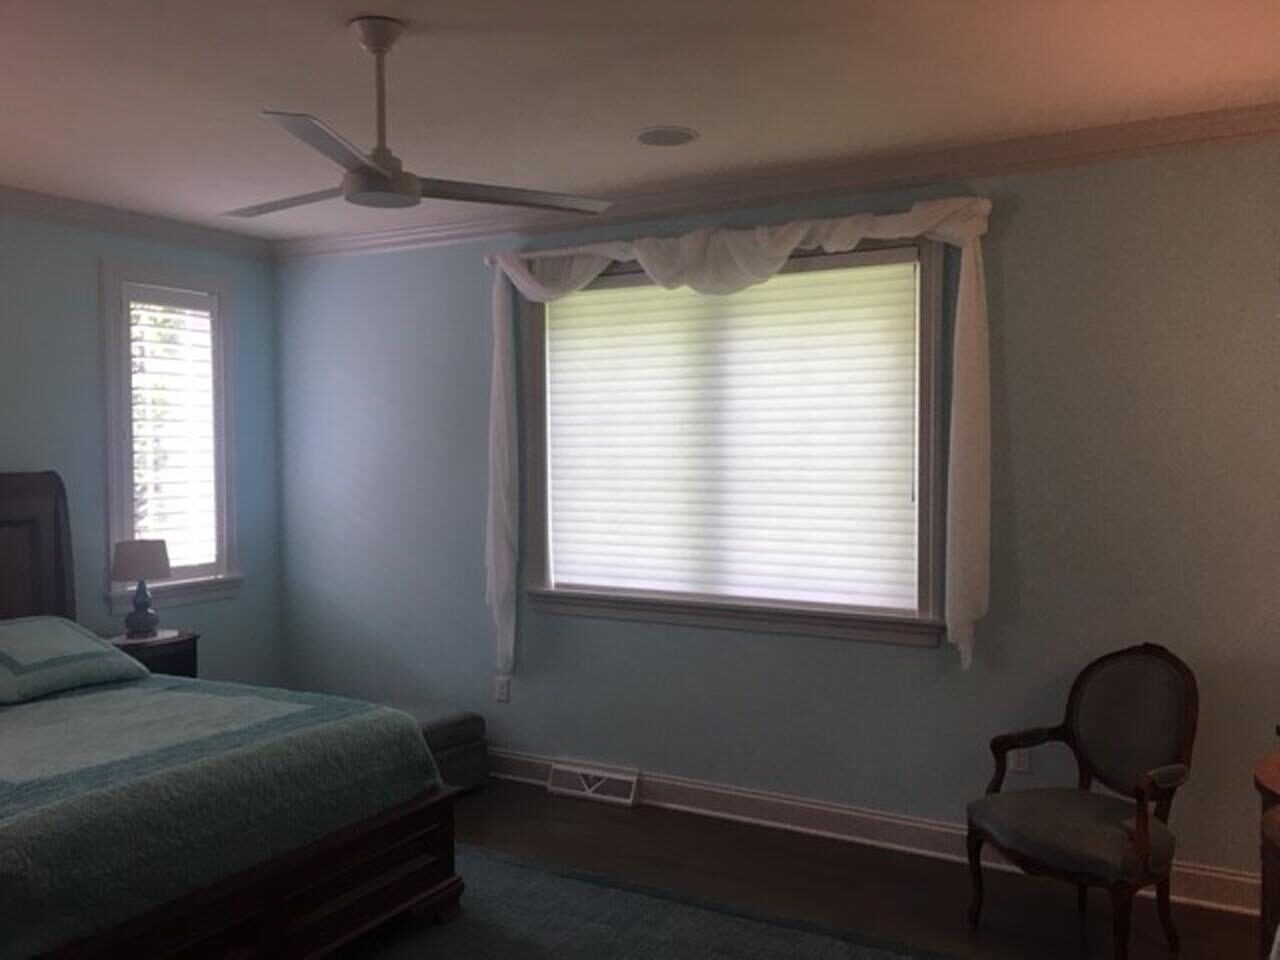 Honeycomb shades and blinds in a bedroom